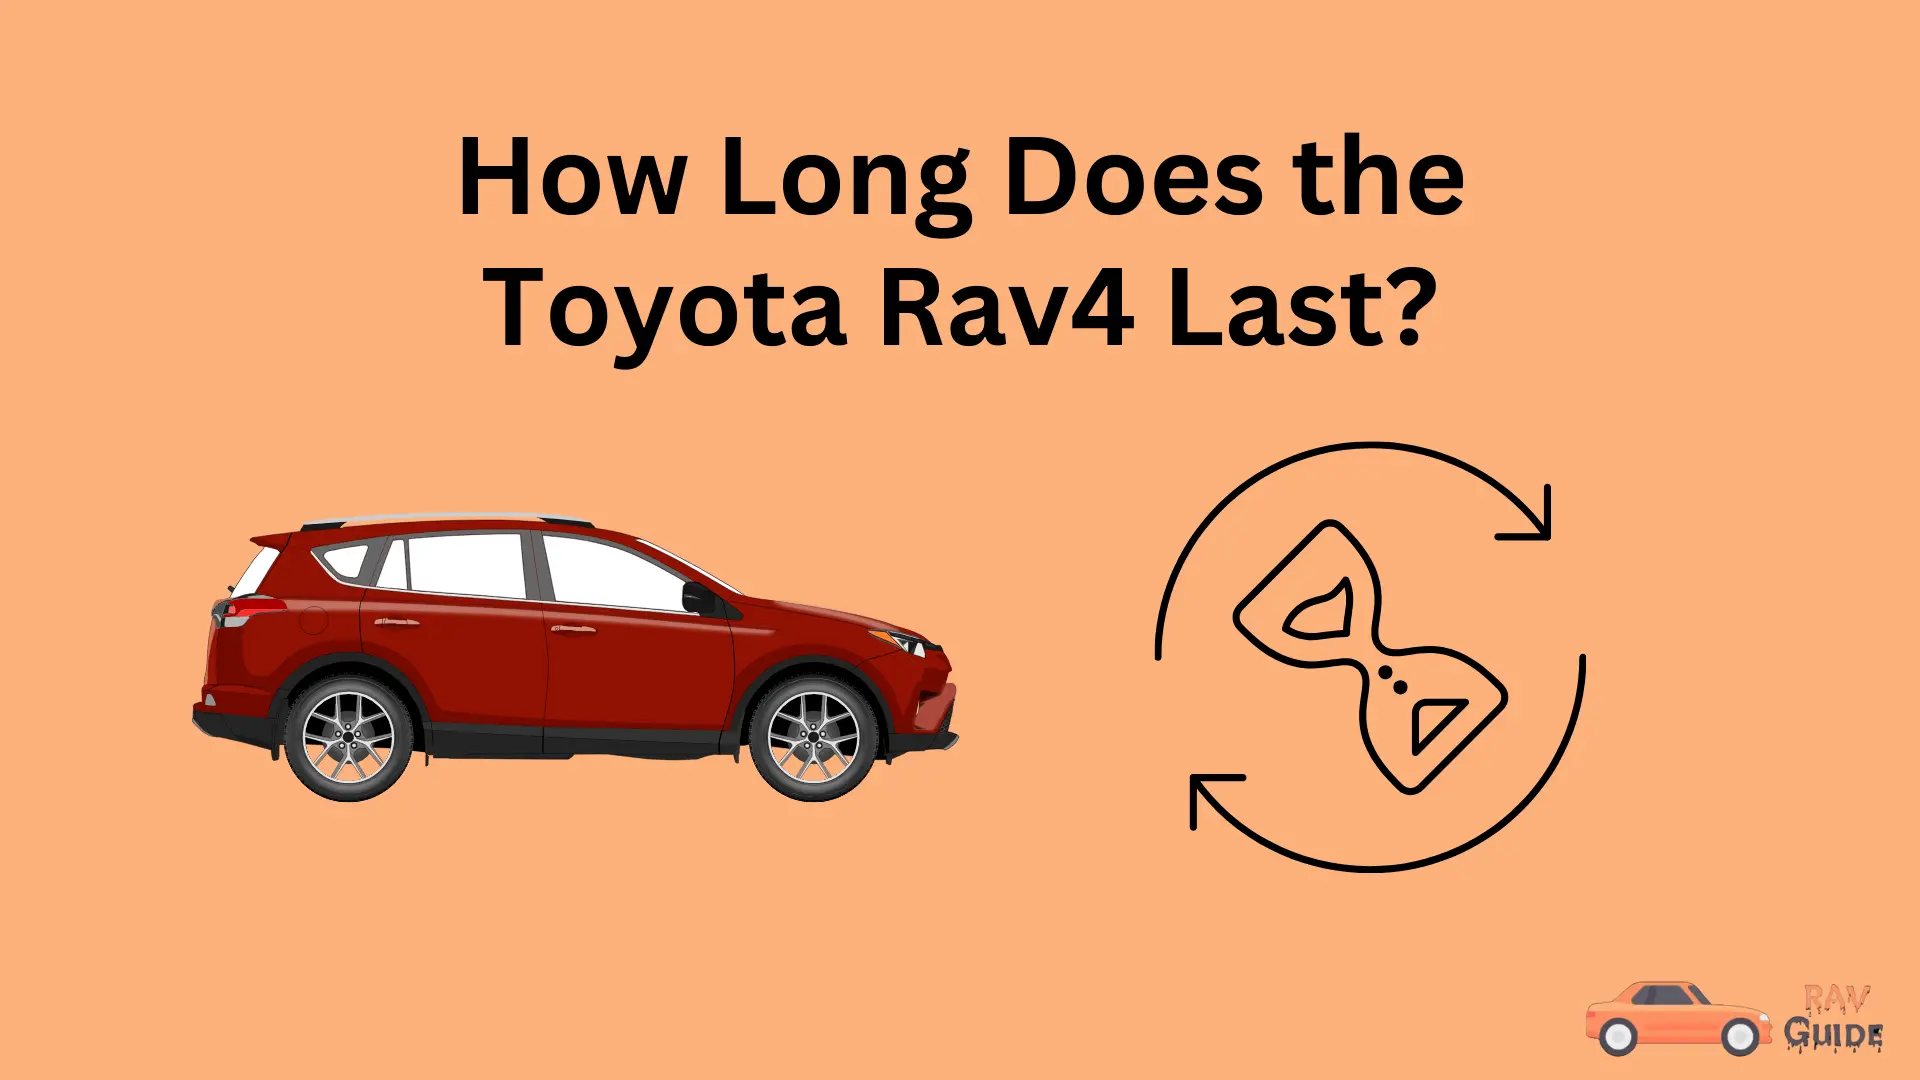 How to Extend the Lifespan of Toyota Rav4?